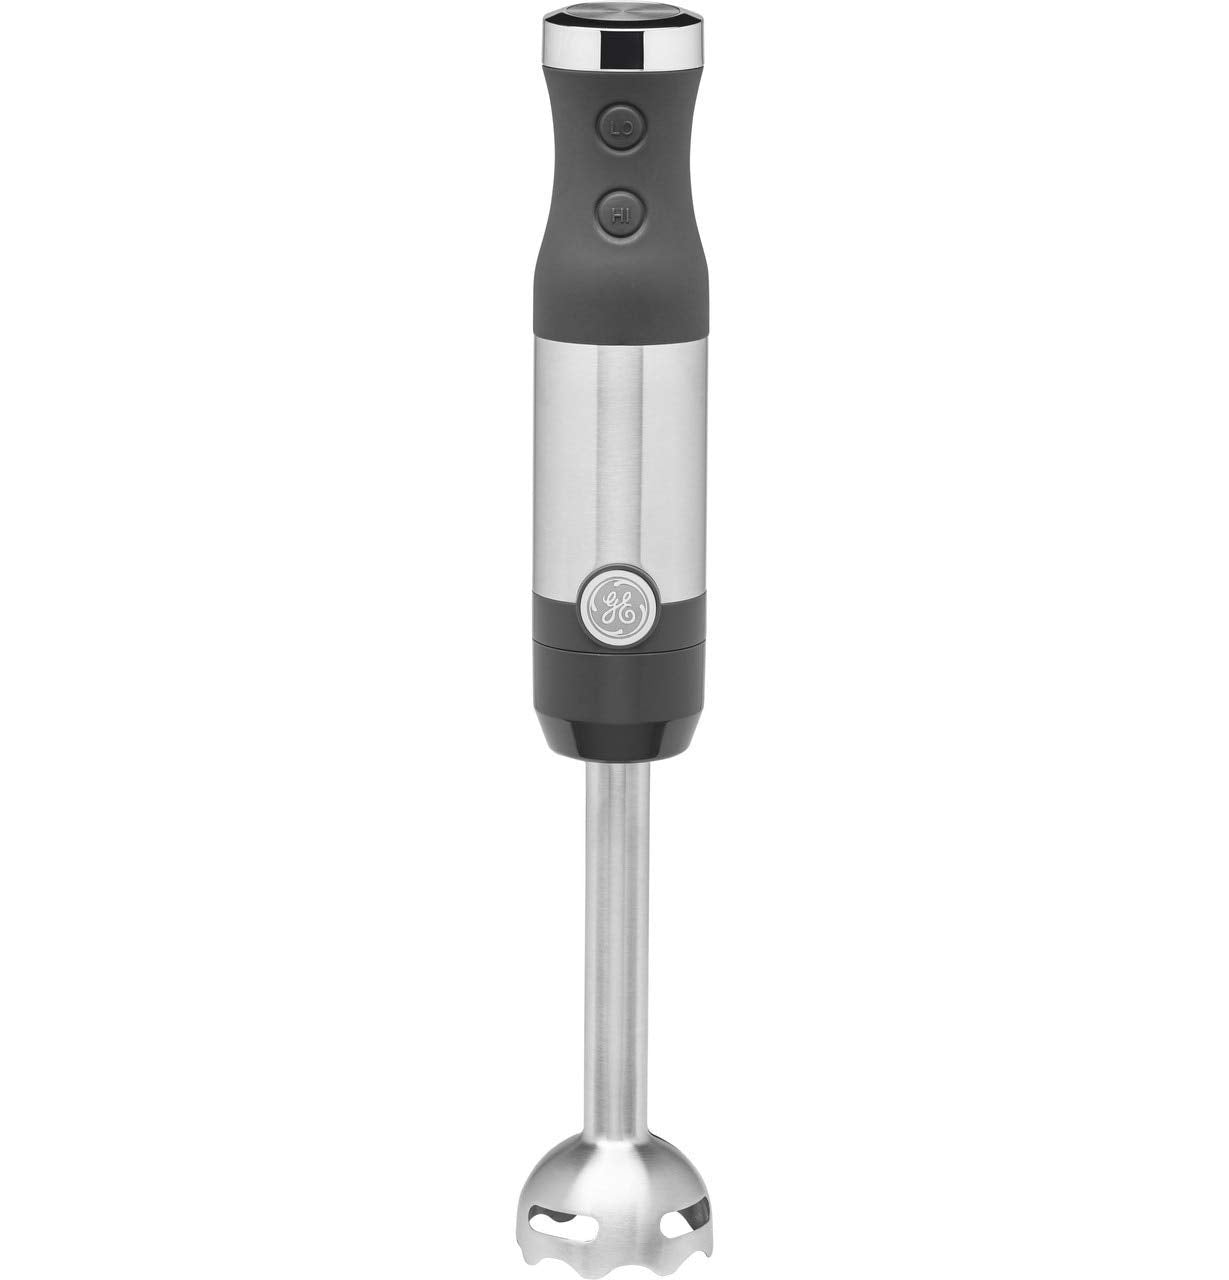 GE Immersion Blender | Handheld Blender for Shakes, Smoothies, Baby Food & More | Includes Whisk & Blending Jar | 2-Speed | Interchangeable Attachment for Easy Clean | 500 Watts | Stainless Steel